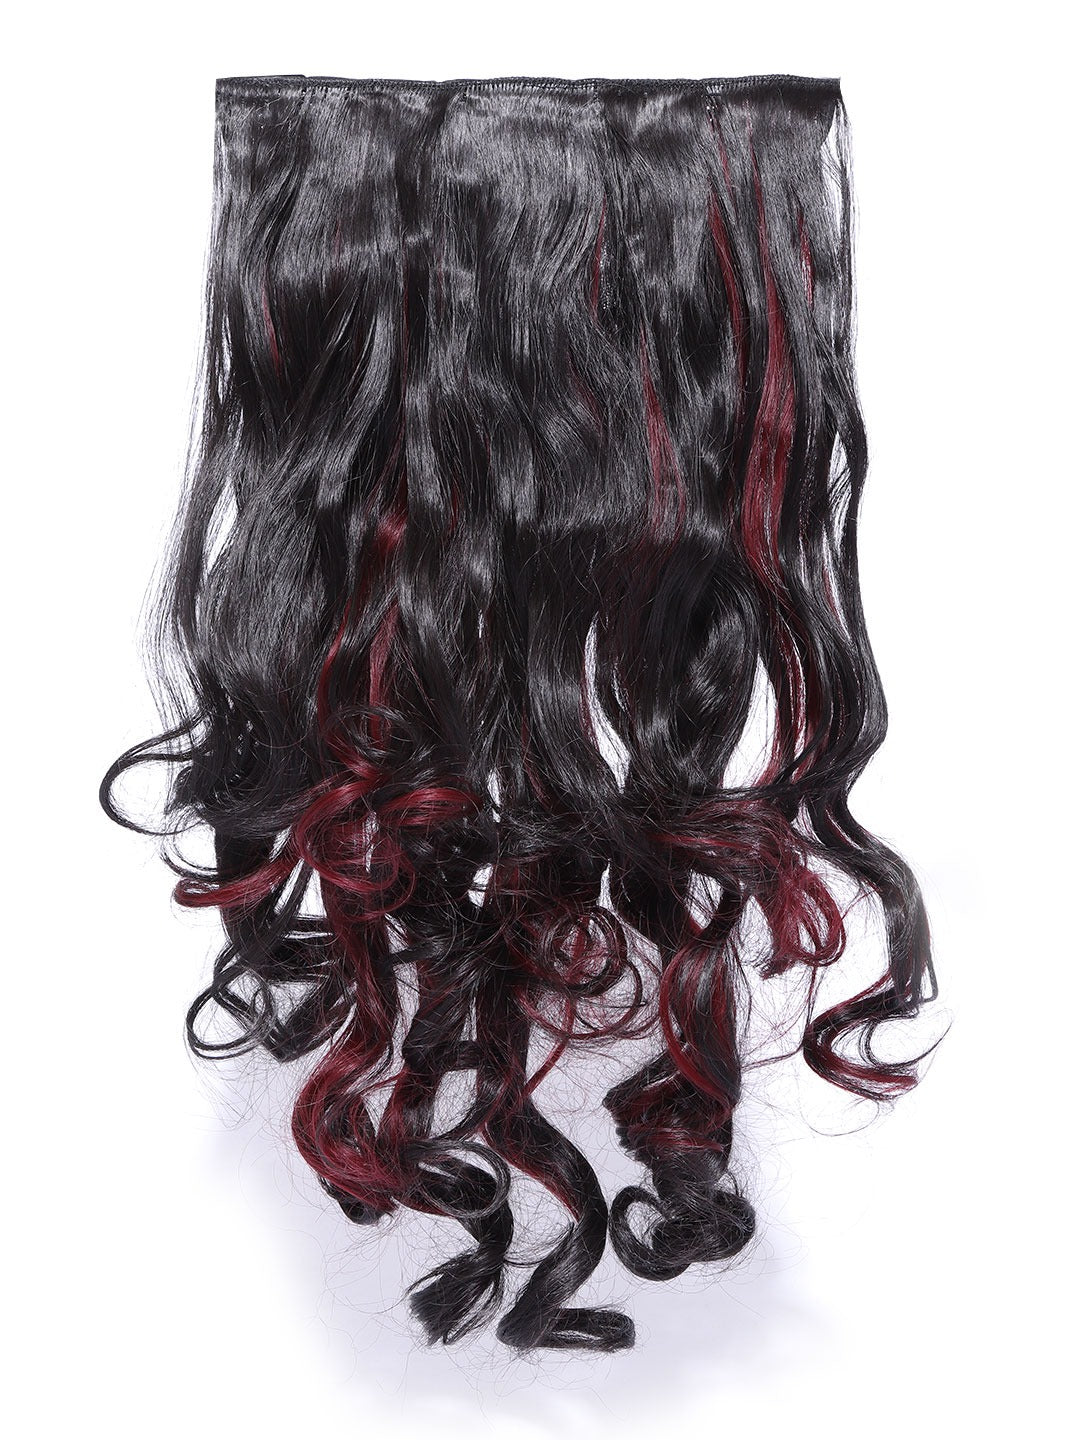 Blueberry Black and burgundy Curly/Wavy premium Hair Extension with 5 clips